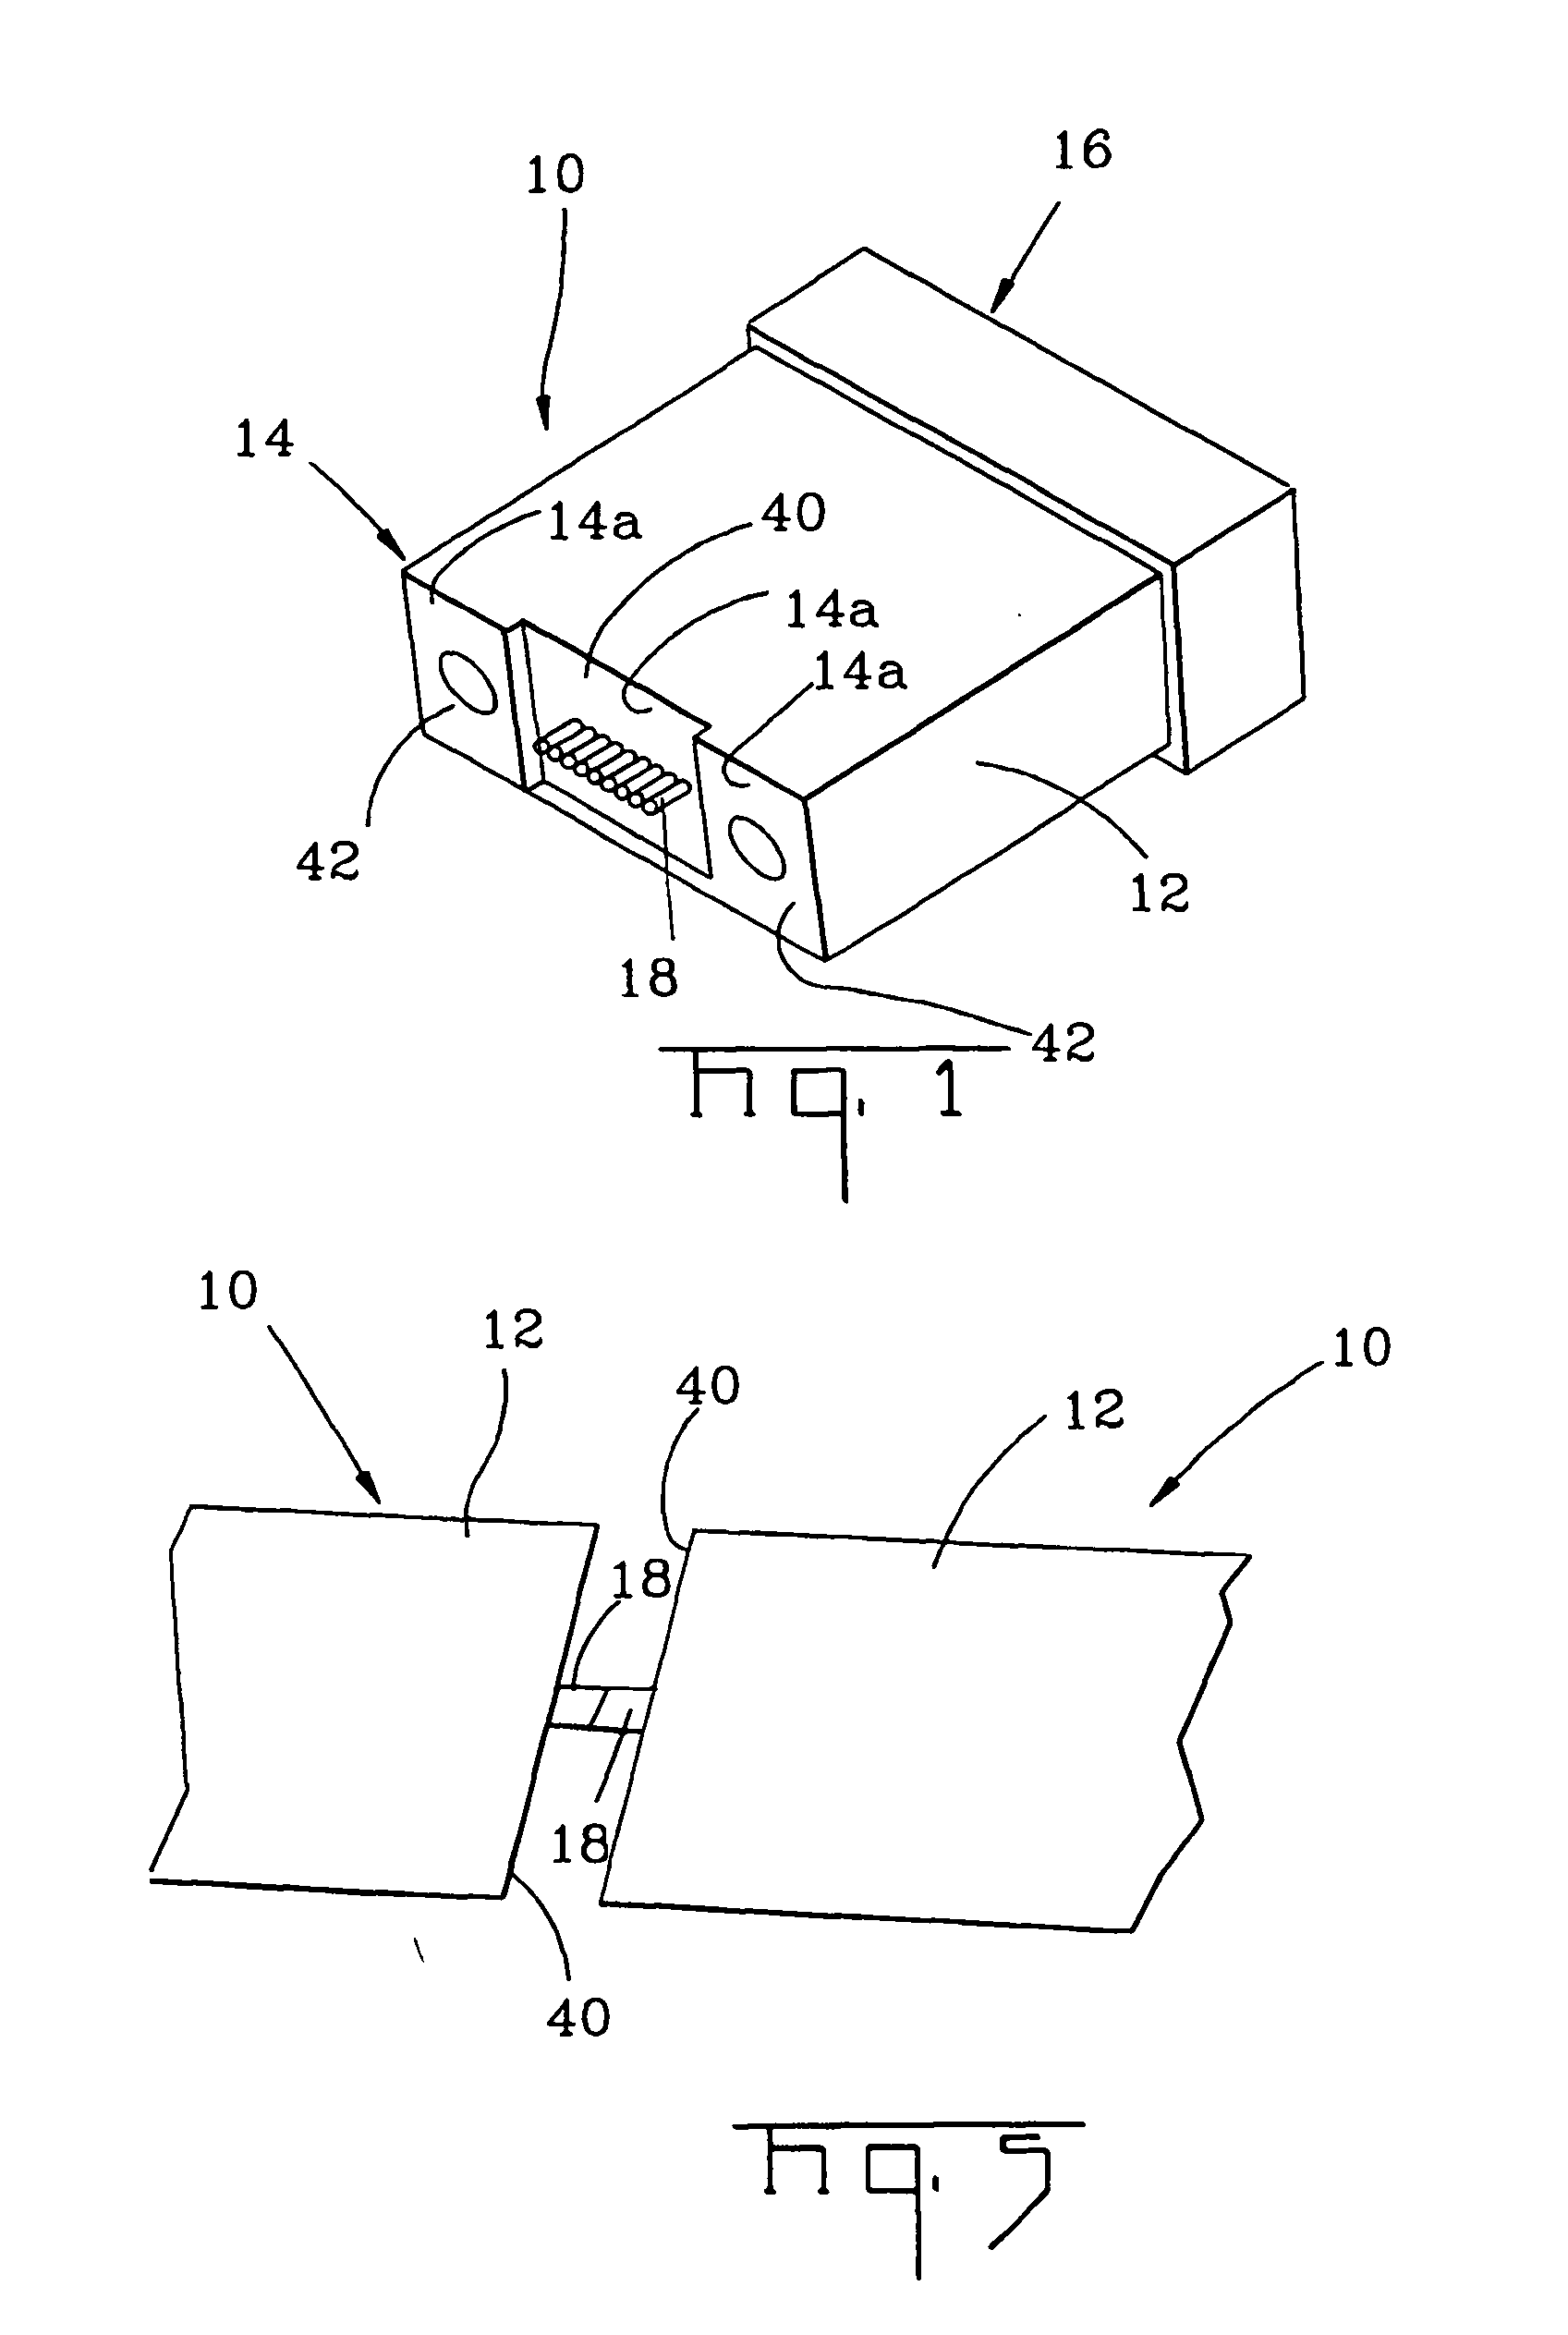 Ferrule assembly having highly protruding optical fibers and an associated fabrication method